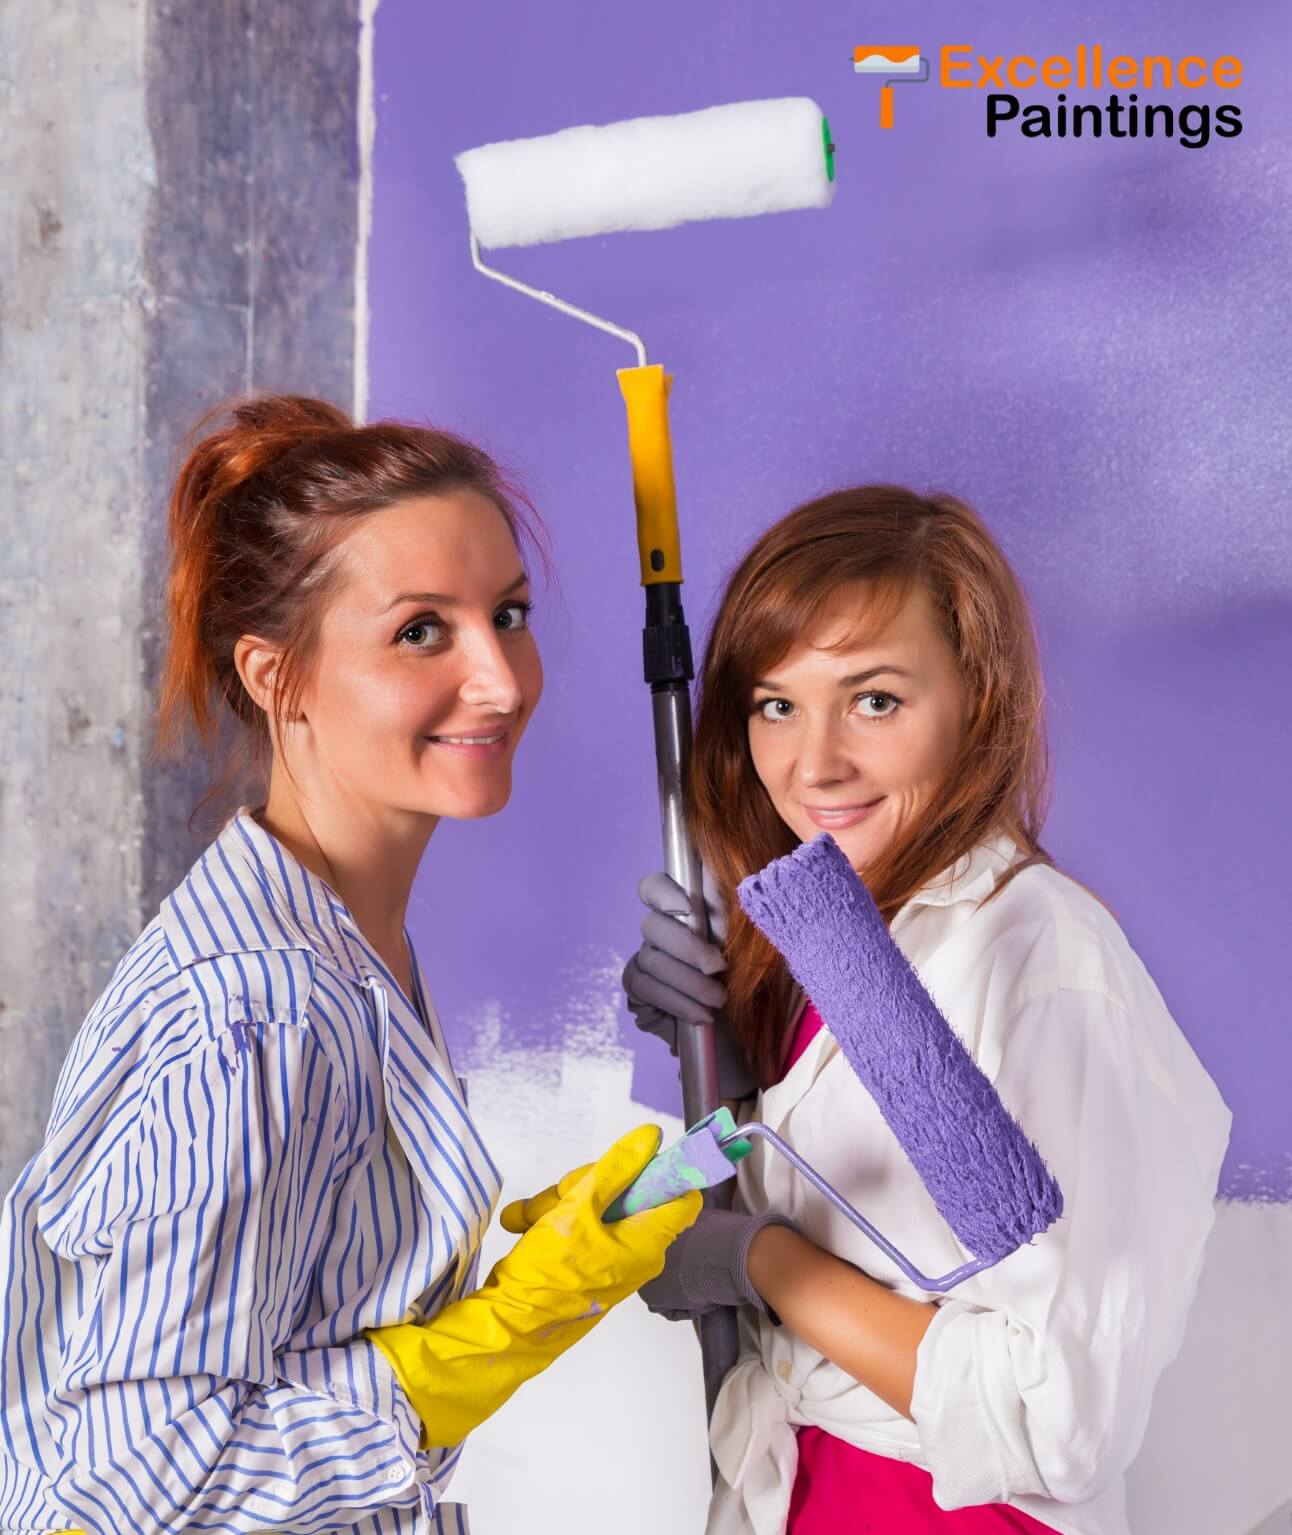 website design painting service company